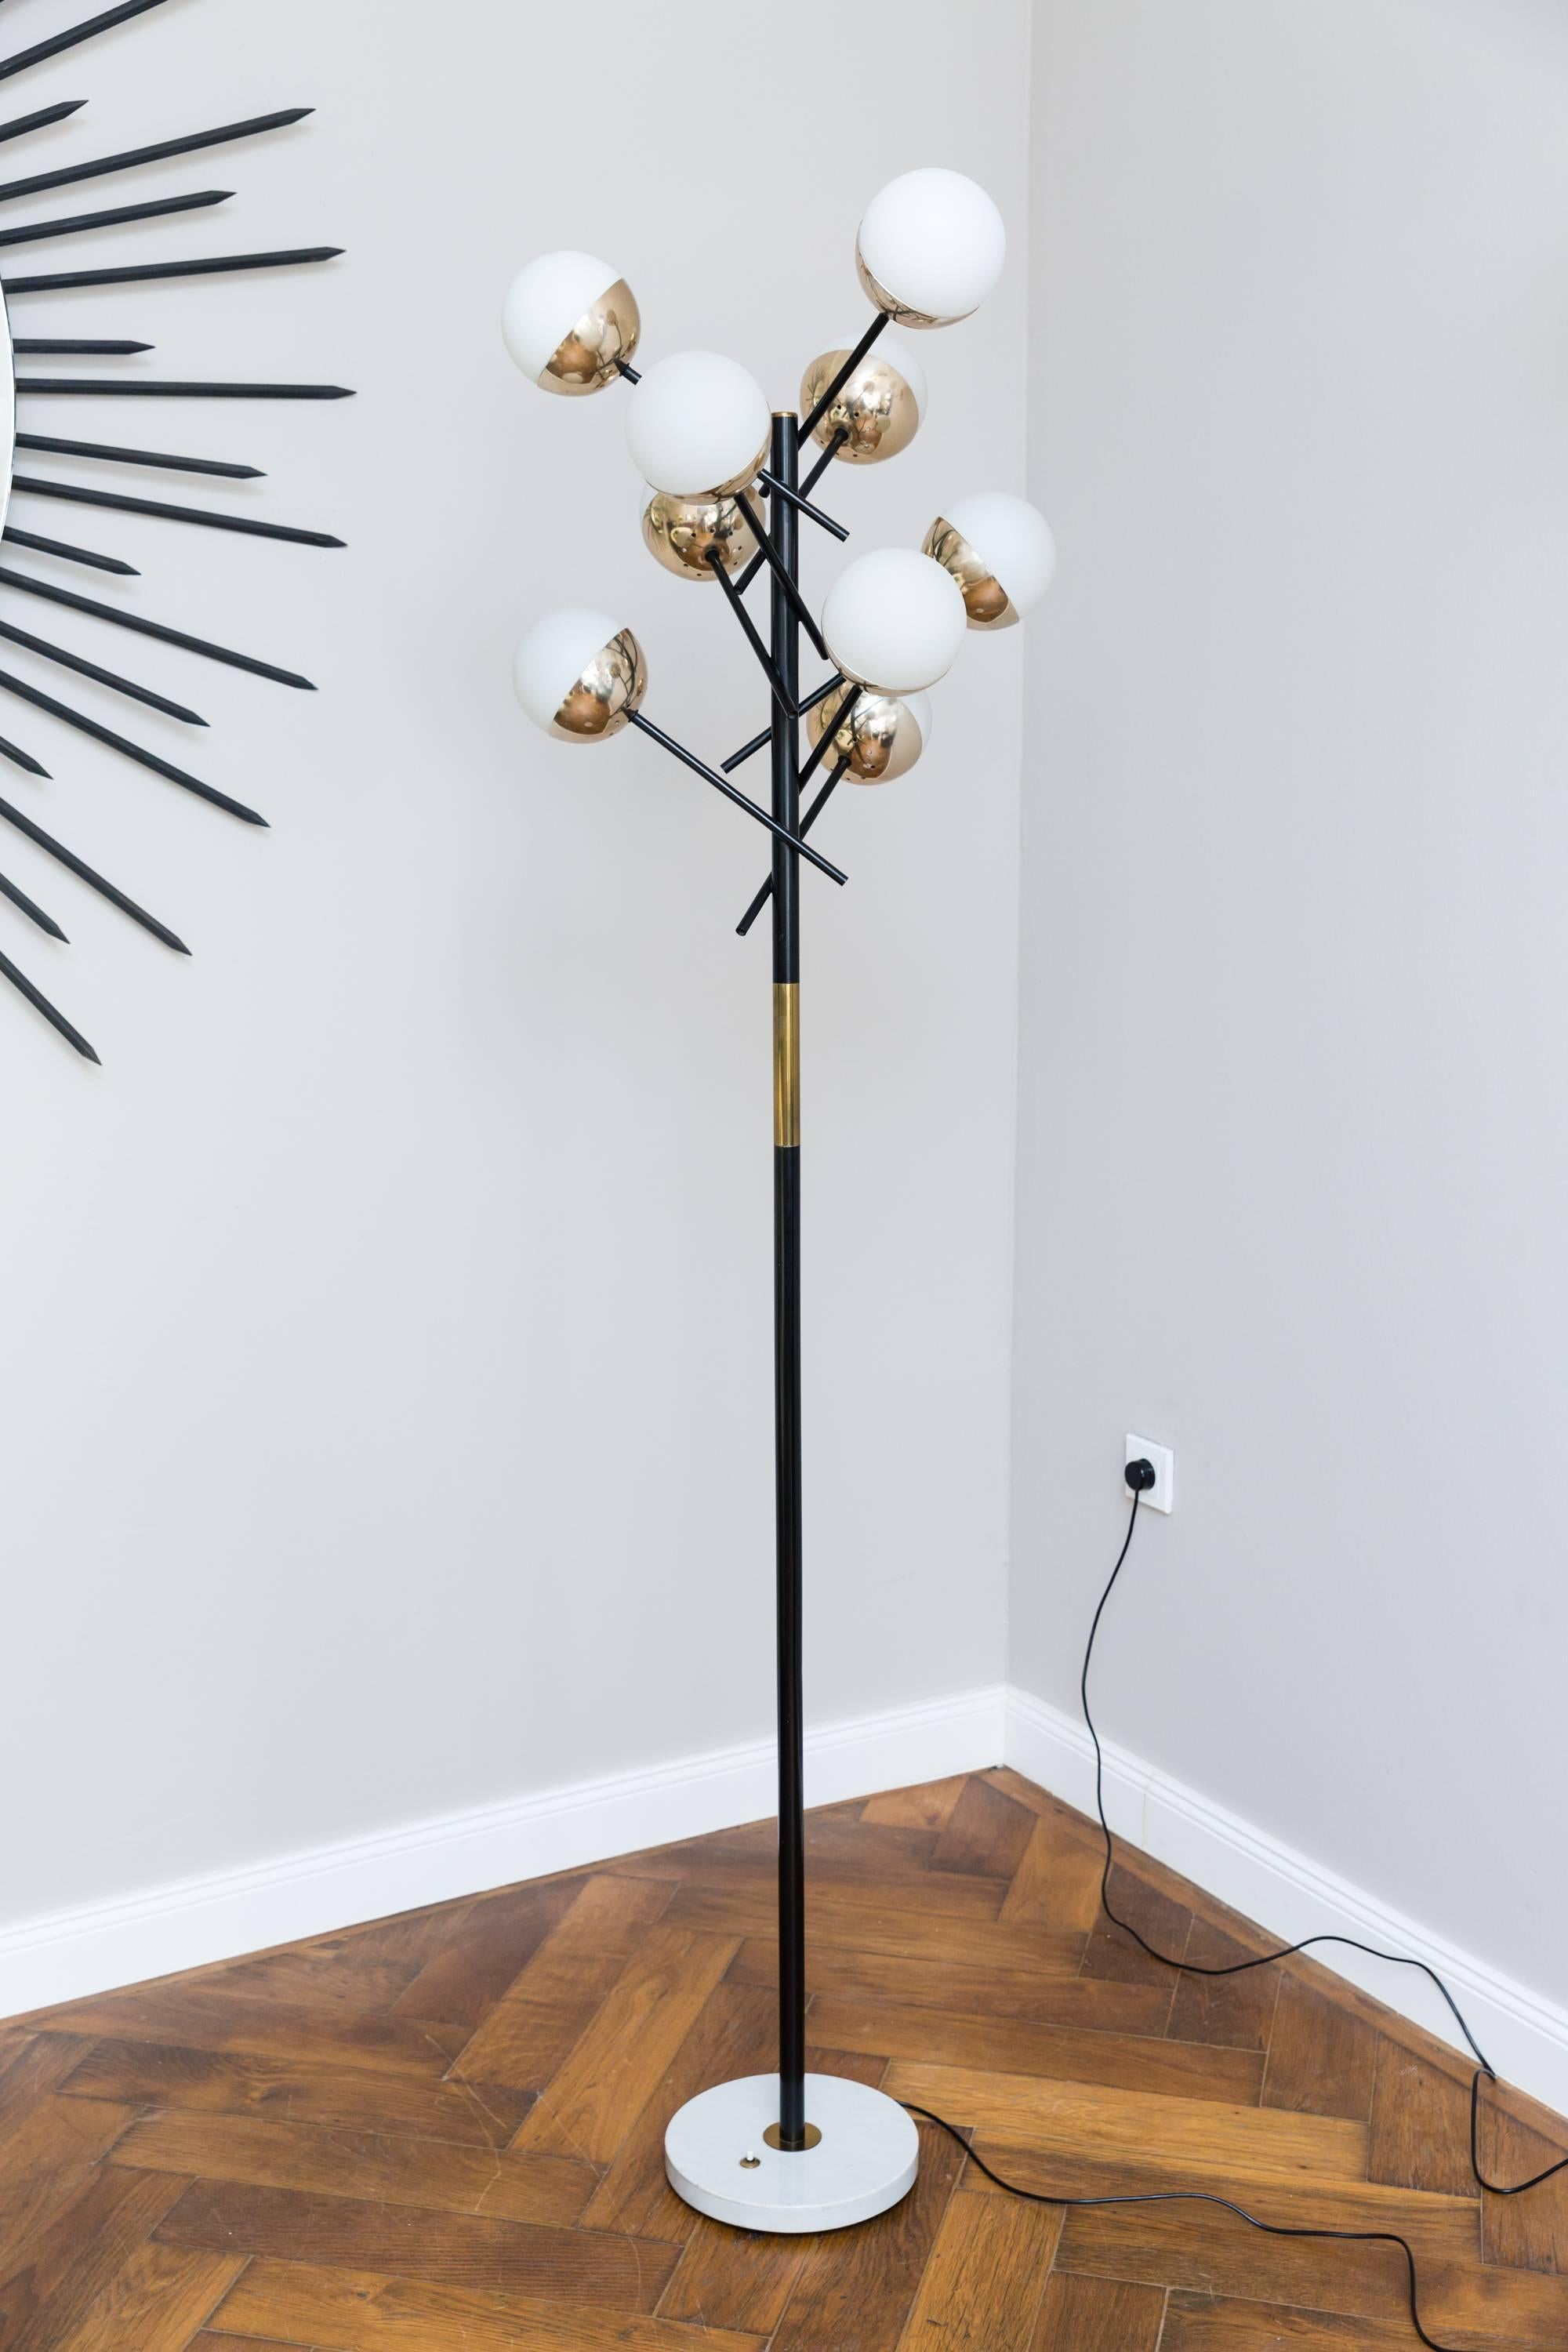 Very elegant and rare floor lamp by Stilnovo, Italy, circa 1955, enamelled metal, brass, marble base, nine opal cased glass diffusers. Measures: Height 185 cm, diameter 53 cm, diameter marble base 30 cm, rewired, very good original vintage